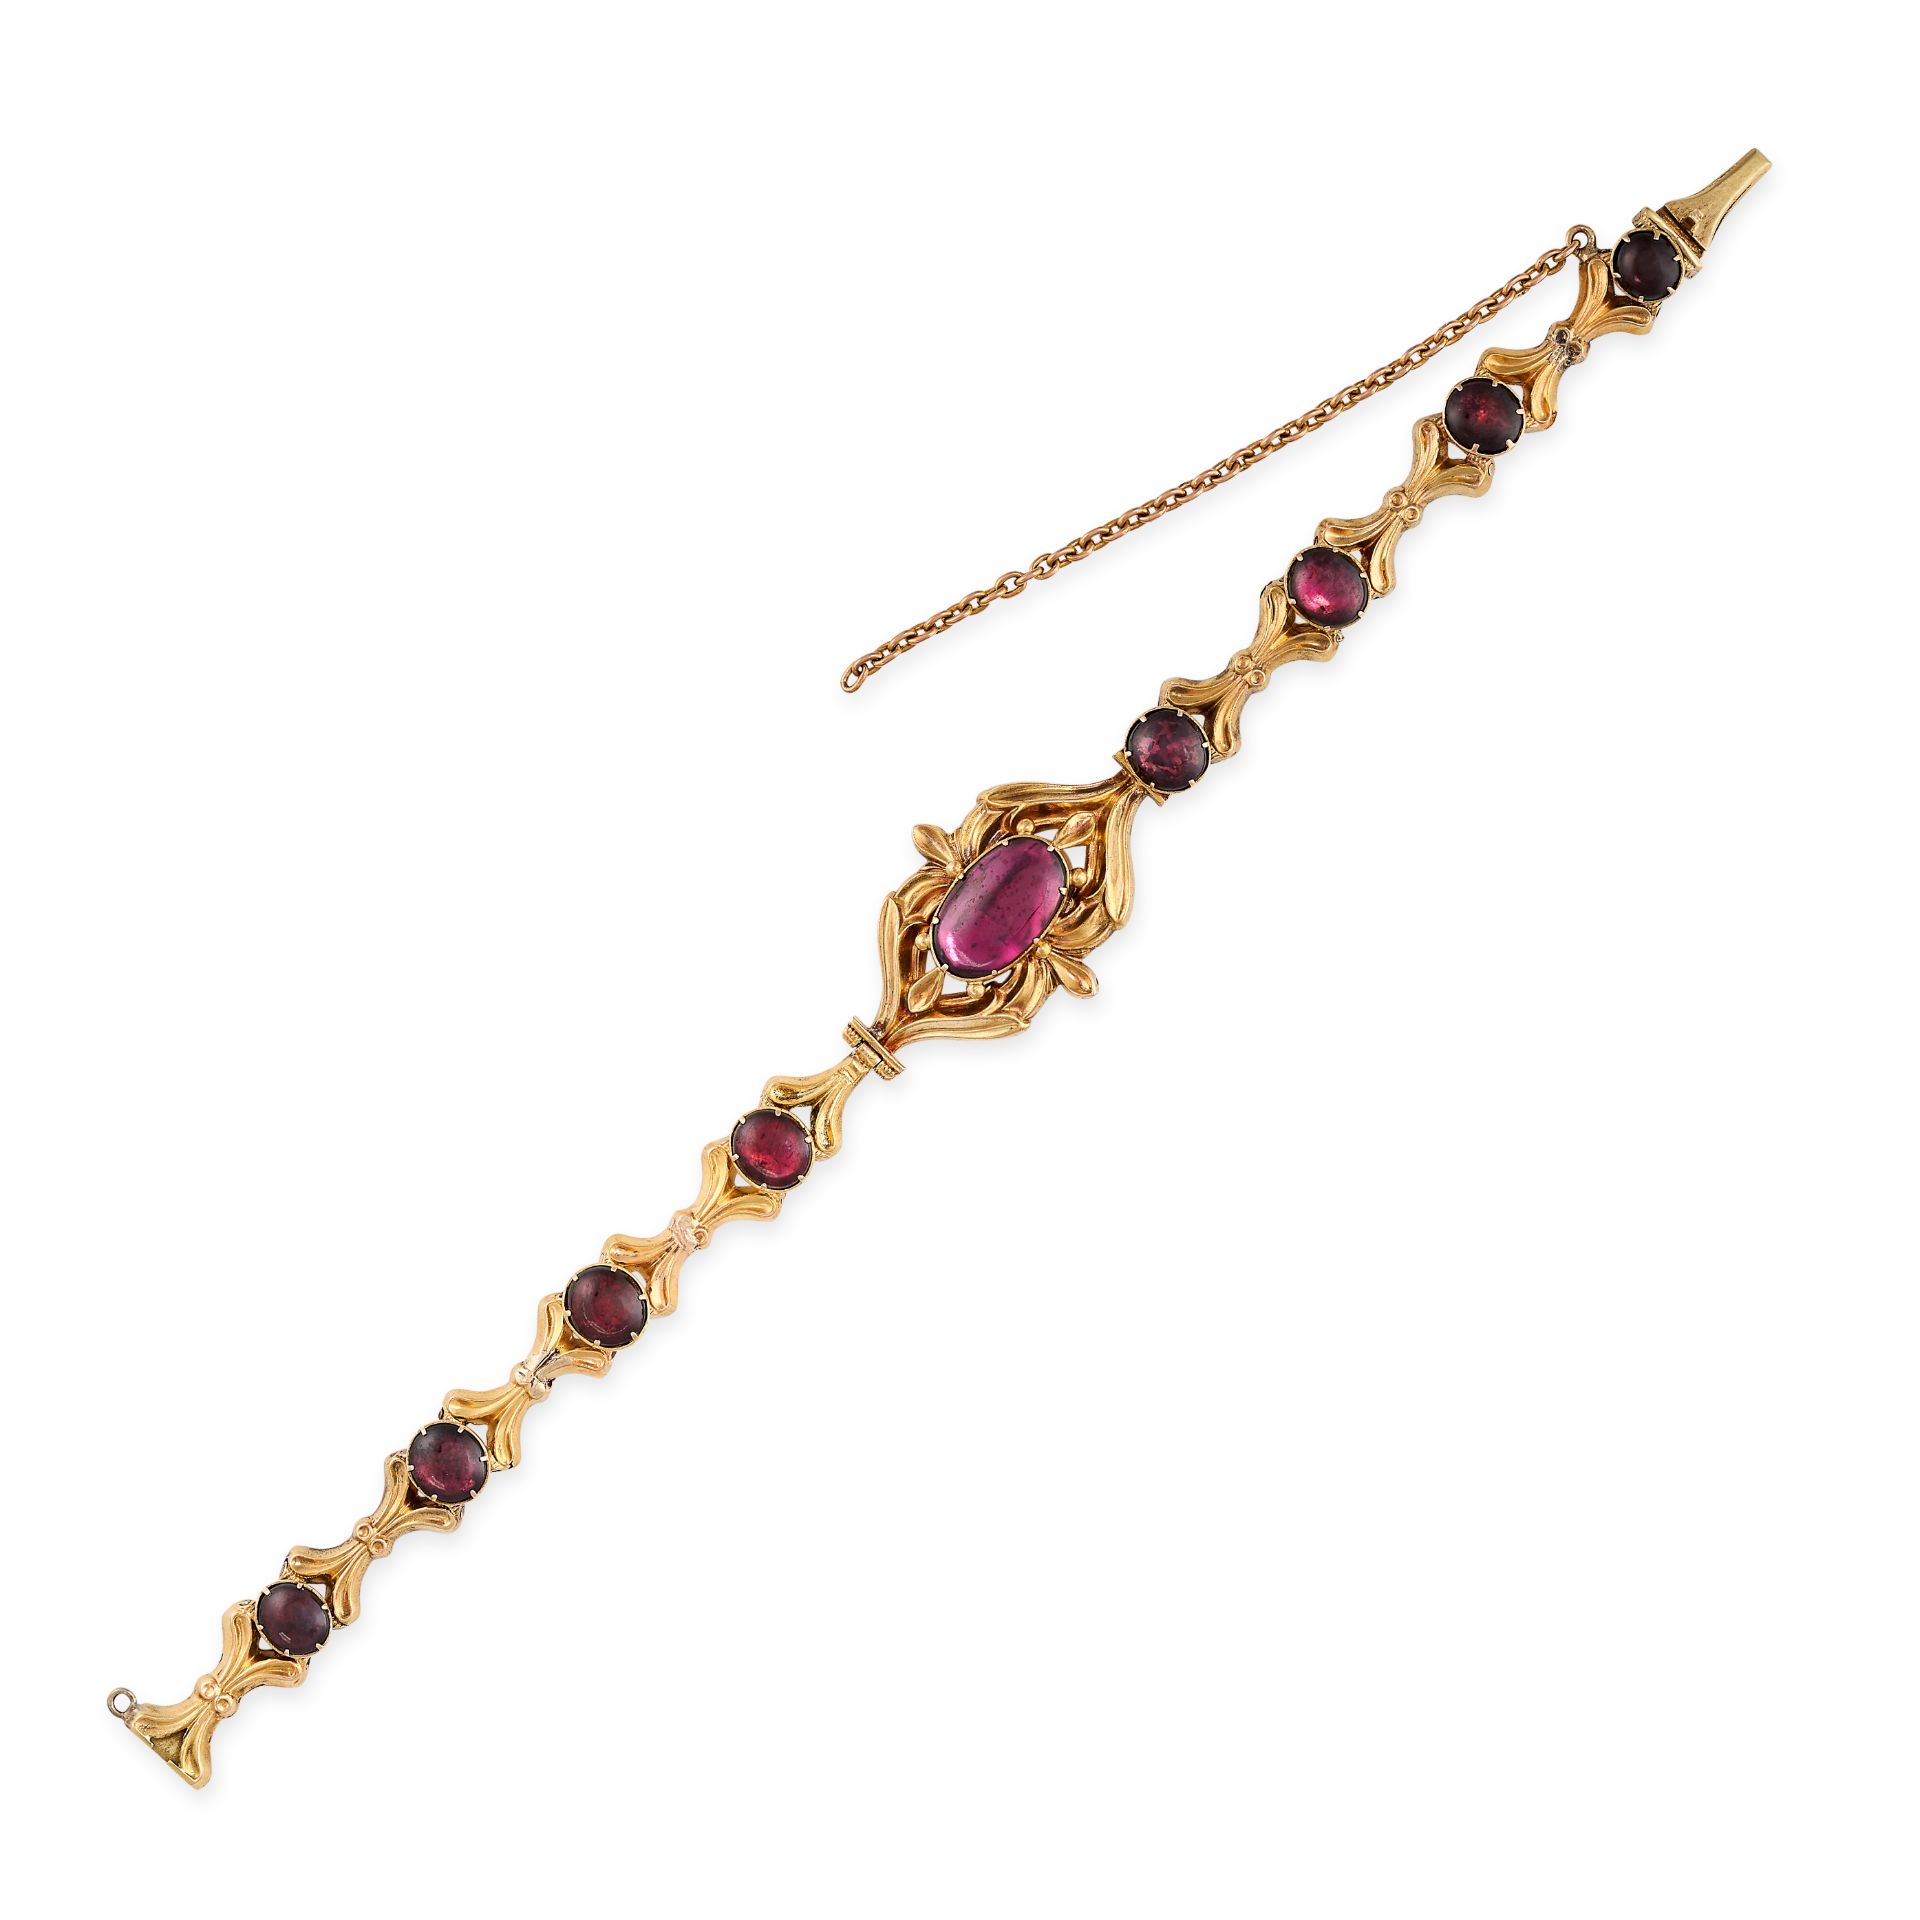 AN ANTIQUE GARNET MOURNING LOCKET BRACELET, 19TH CENTURY in yellow gold, the body formed of a series